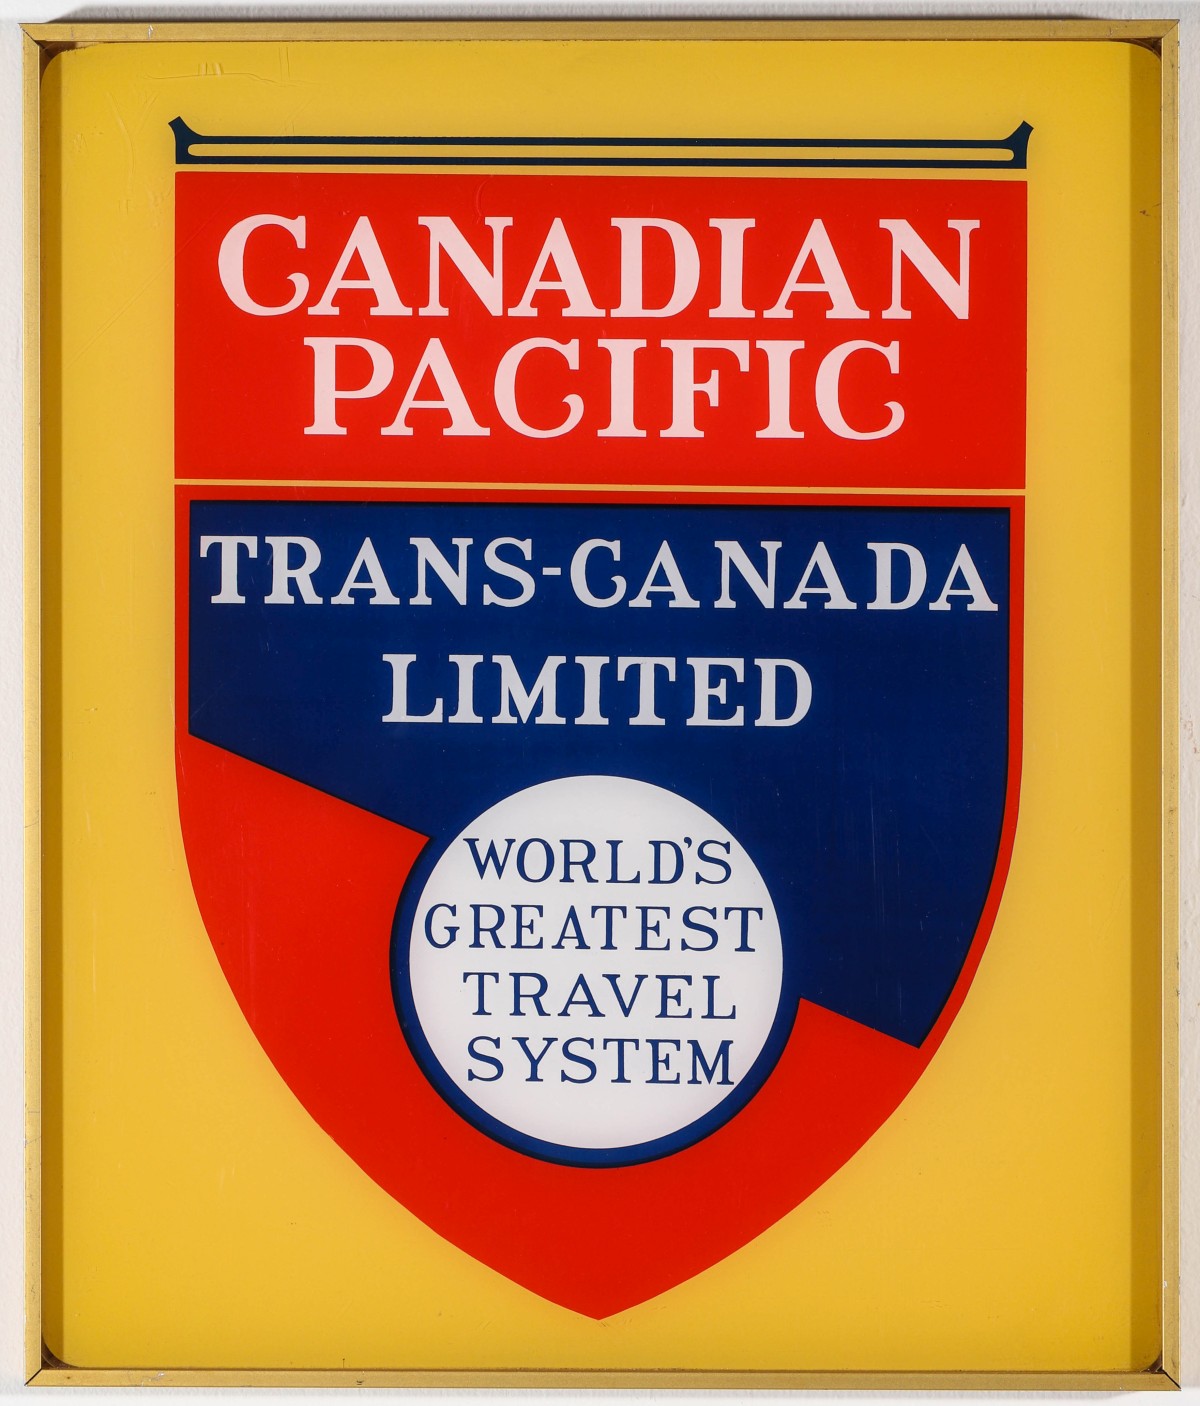 A CANADIAN PACIFIC TRANS-CANADA TAIL SIGN INSERT